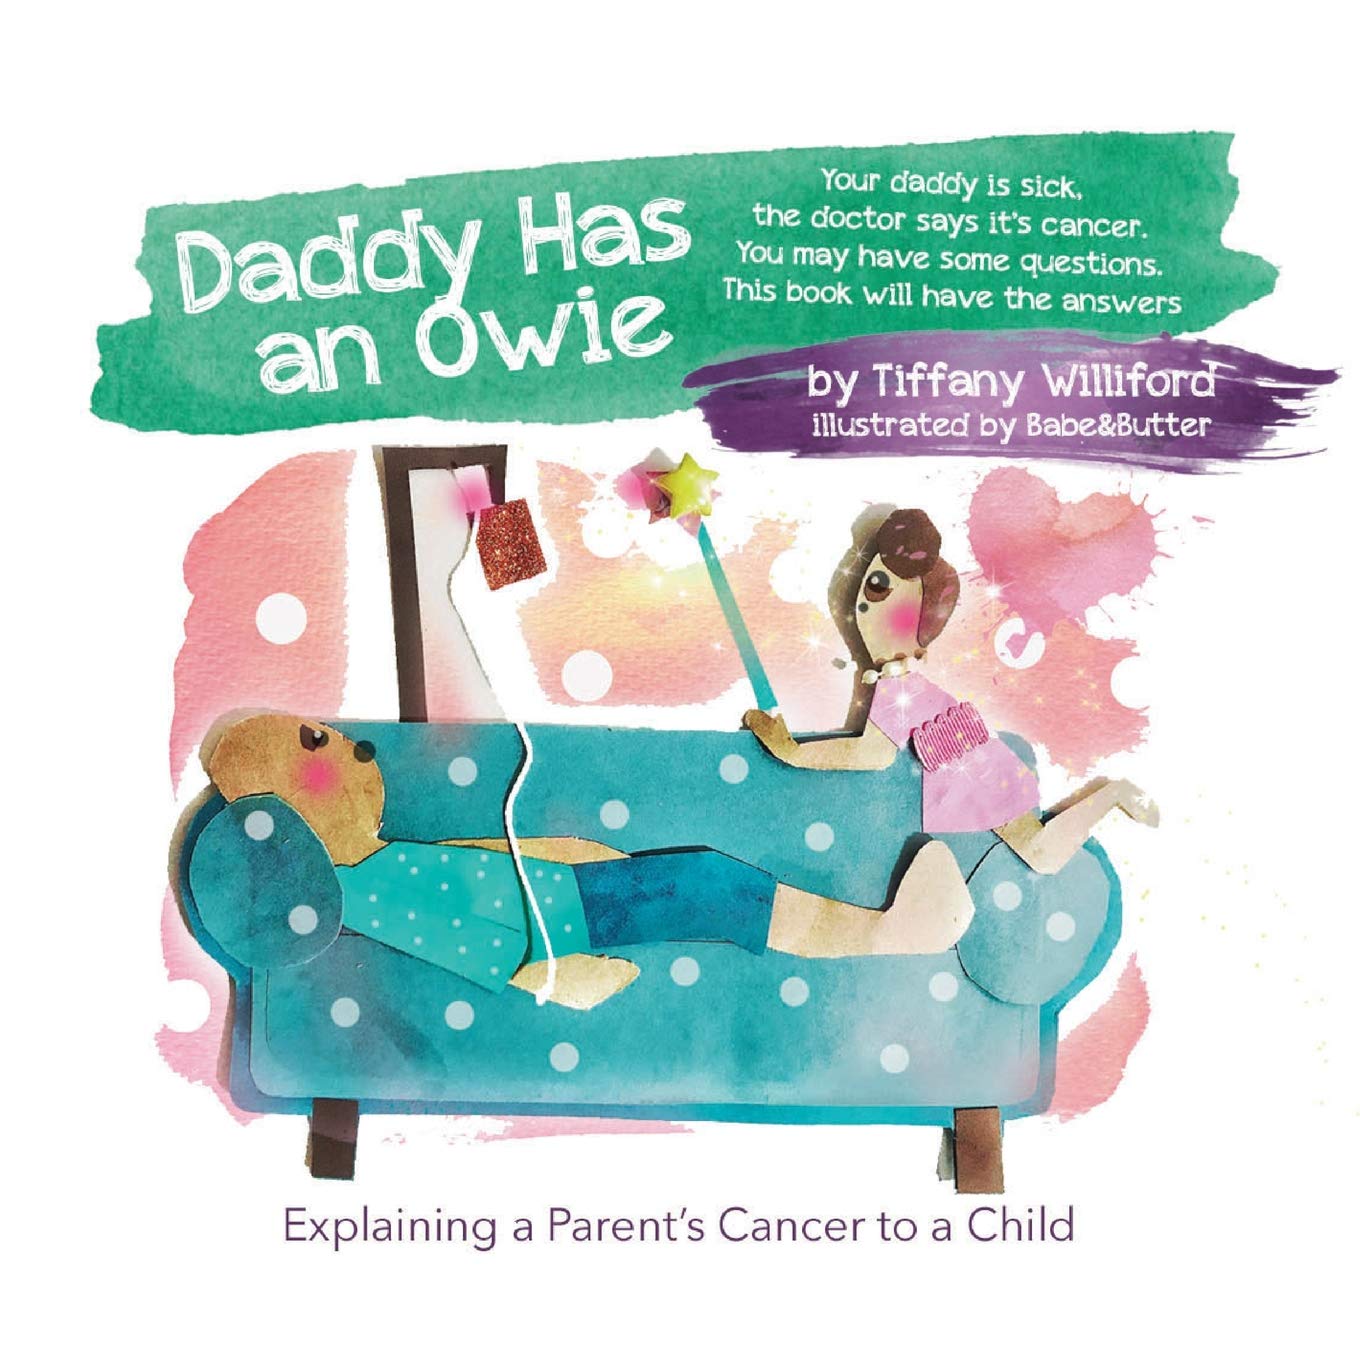 Daddy Has an Owie book cover image